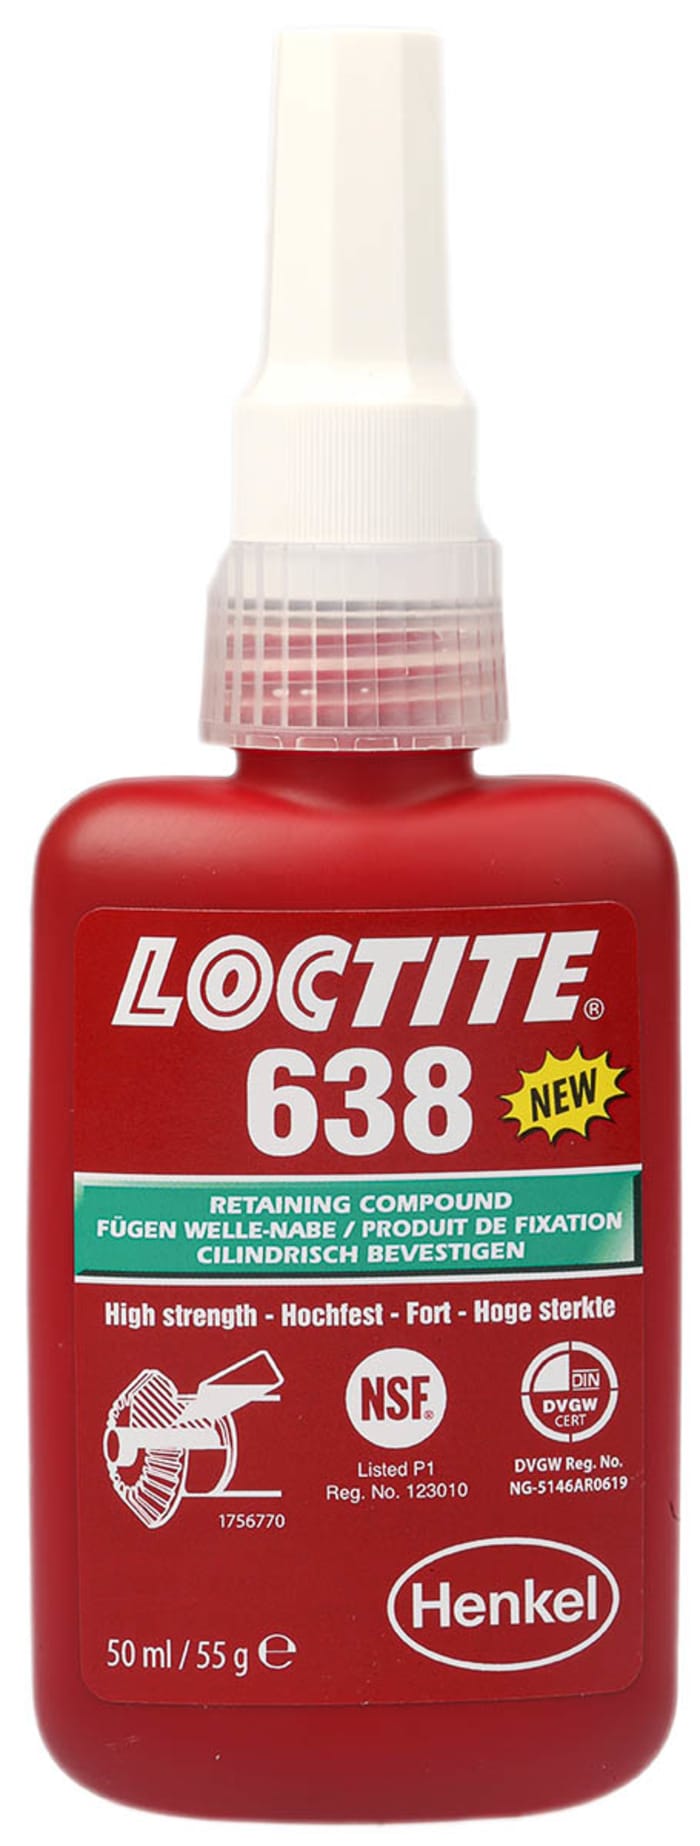 Loctite | Clover Retaining Compound: 250 ml Bottle, Green, Liquid - High Strength, 300 ° F Max Operating Temp, Series 680 | Part #1835196